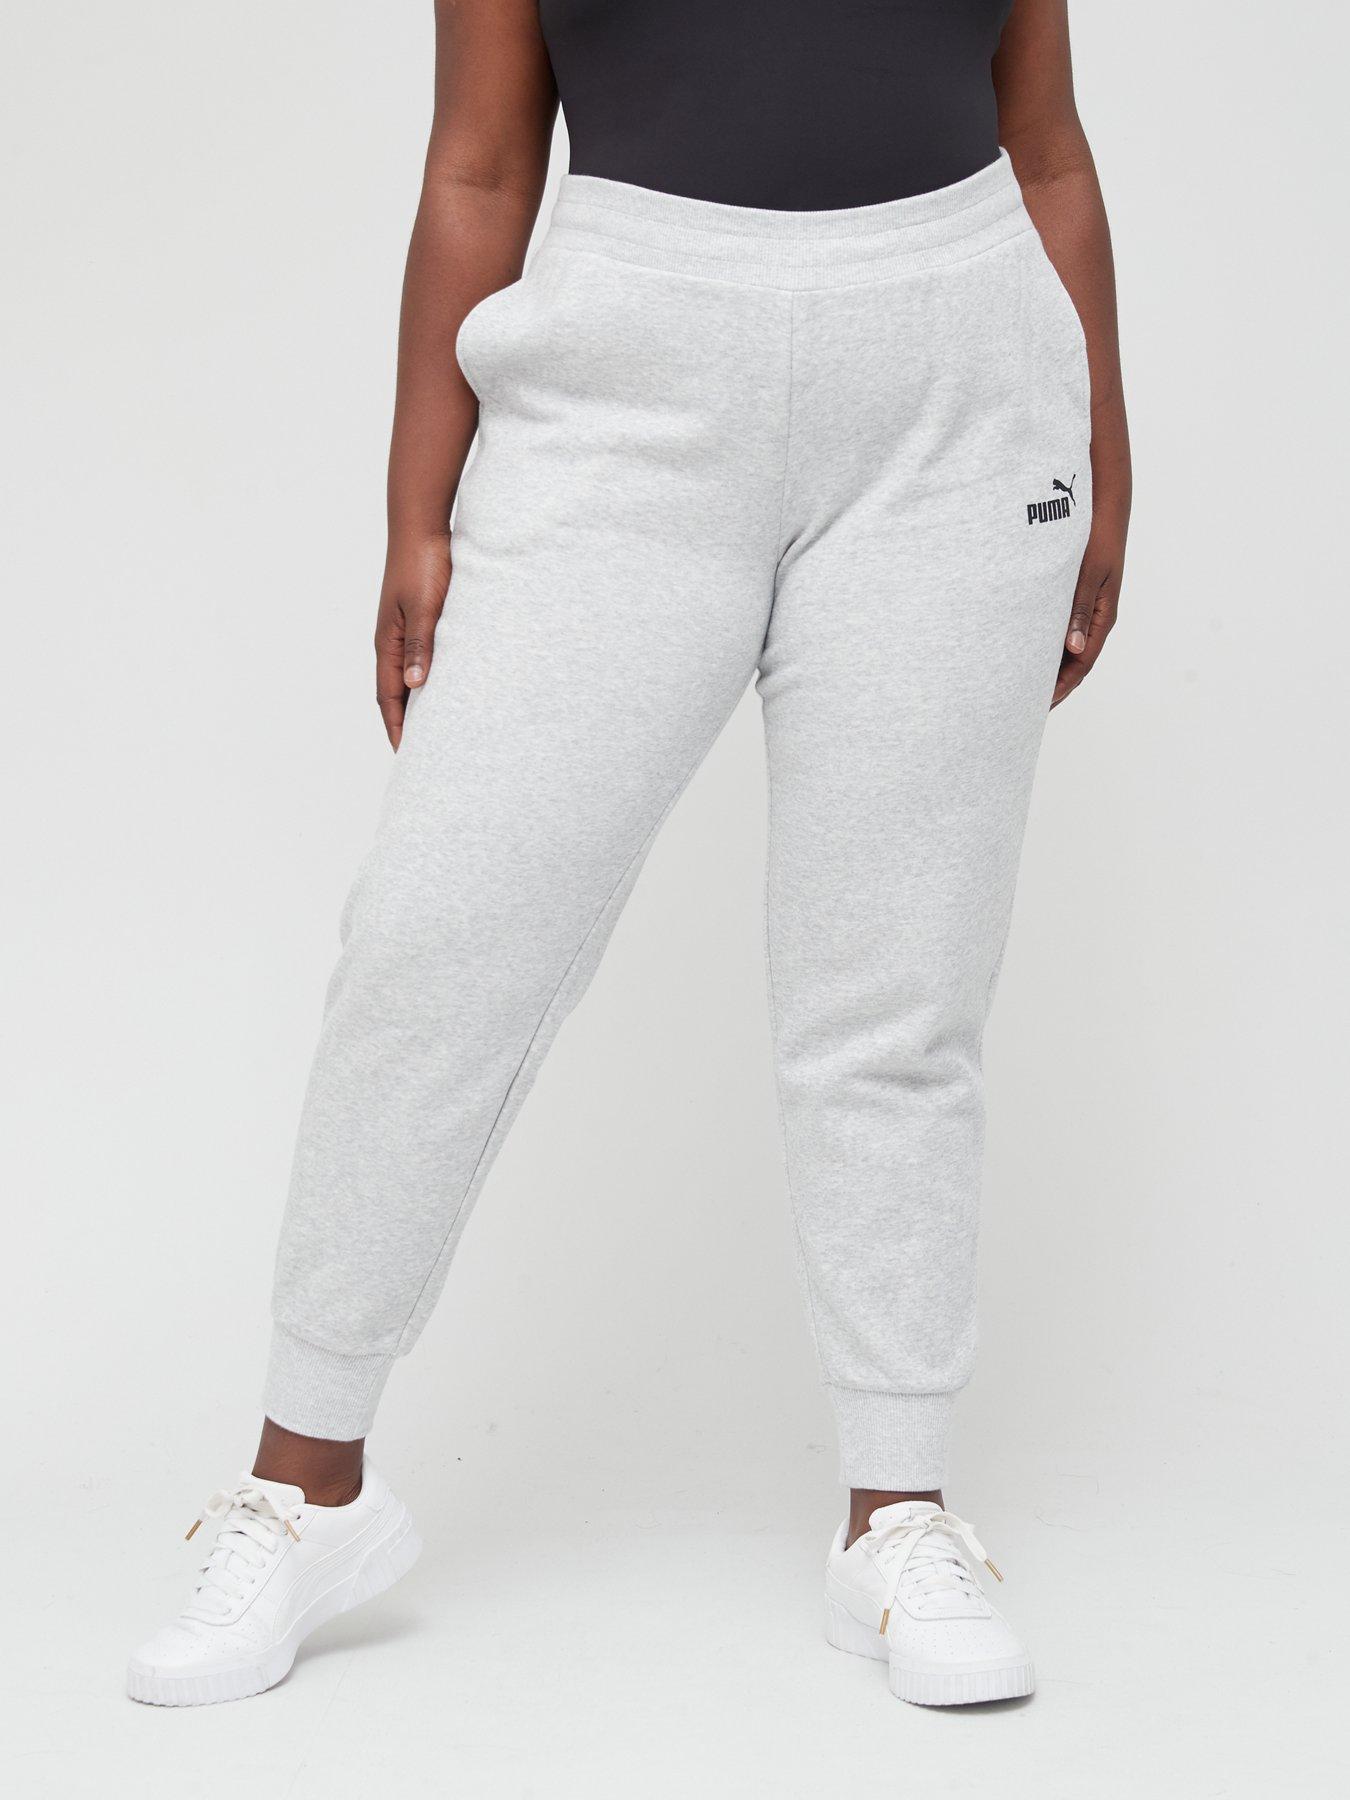 Plus Size Activewear and Streetwear